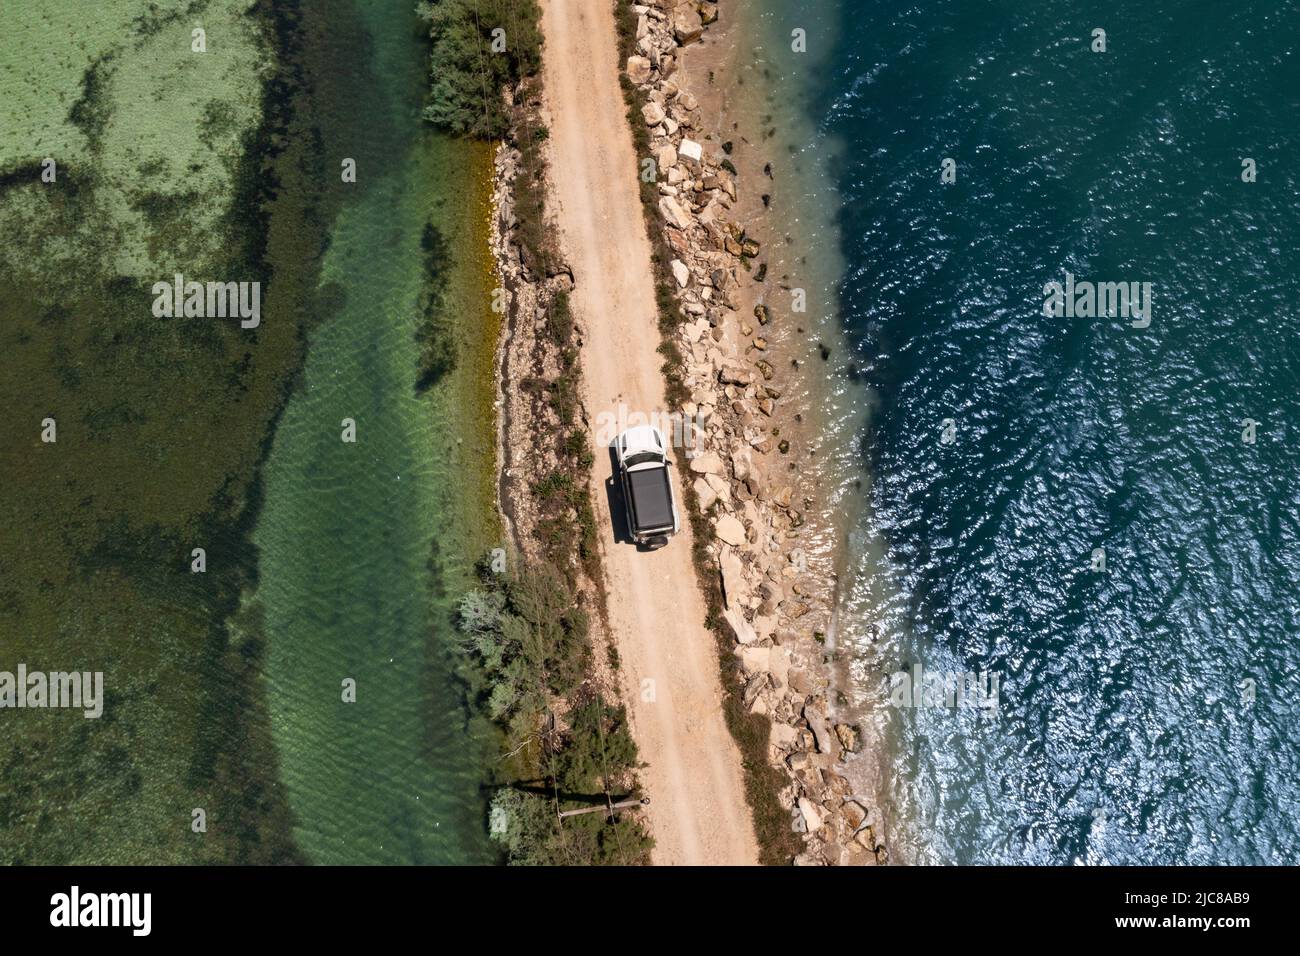 Aerial view of an off-road vehicle on an expedition through a lagoon (Amvrakikos Wetlands National Park) Stock Photo